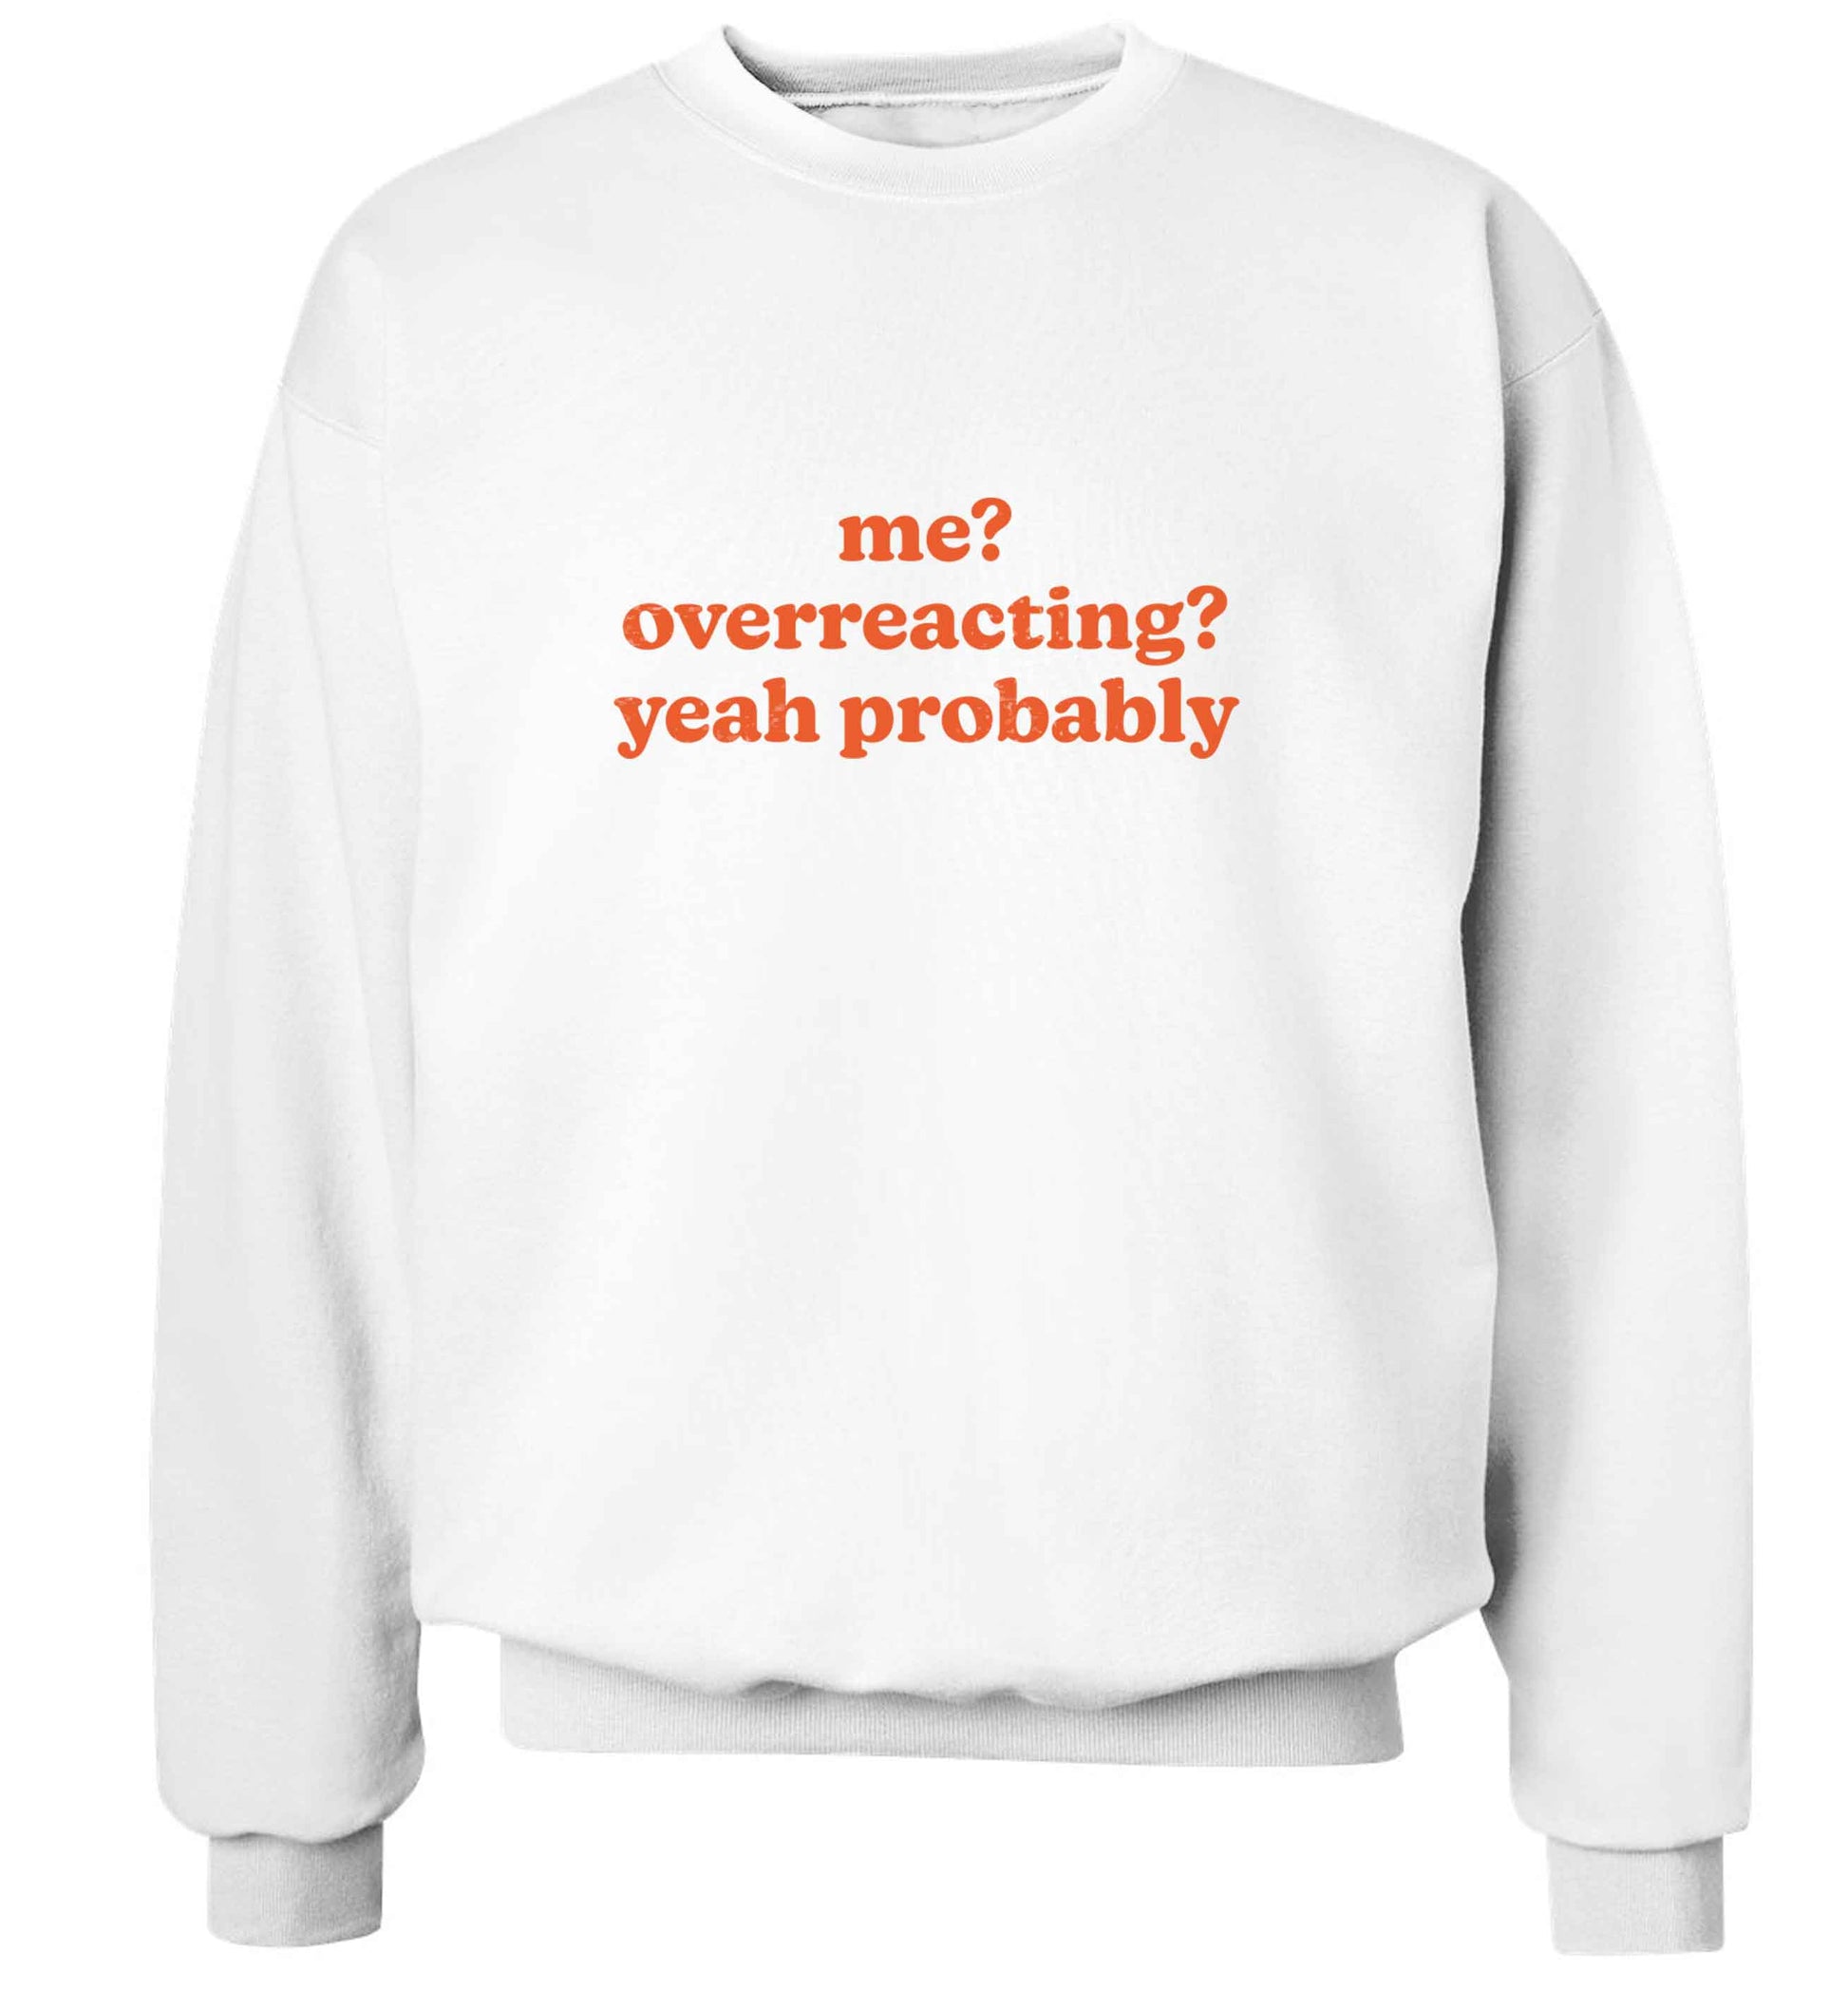 Me? Overreacting? Yeah probably adult's unisex white sweater 2XL